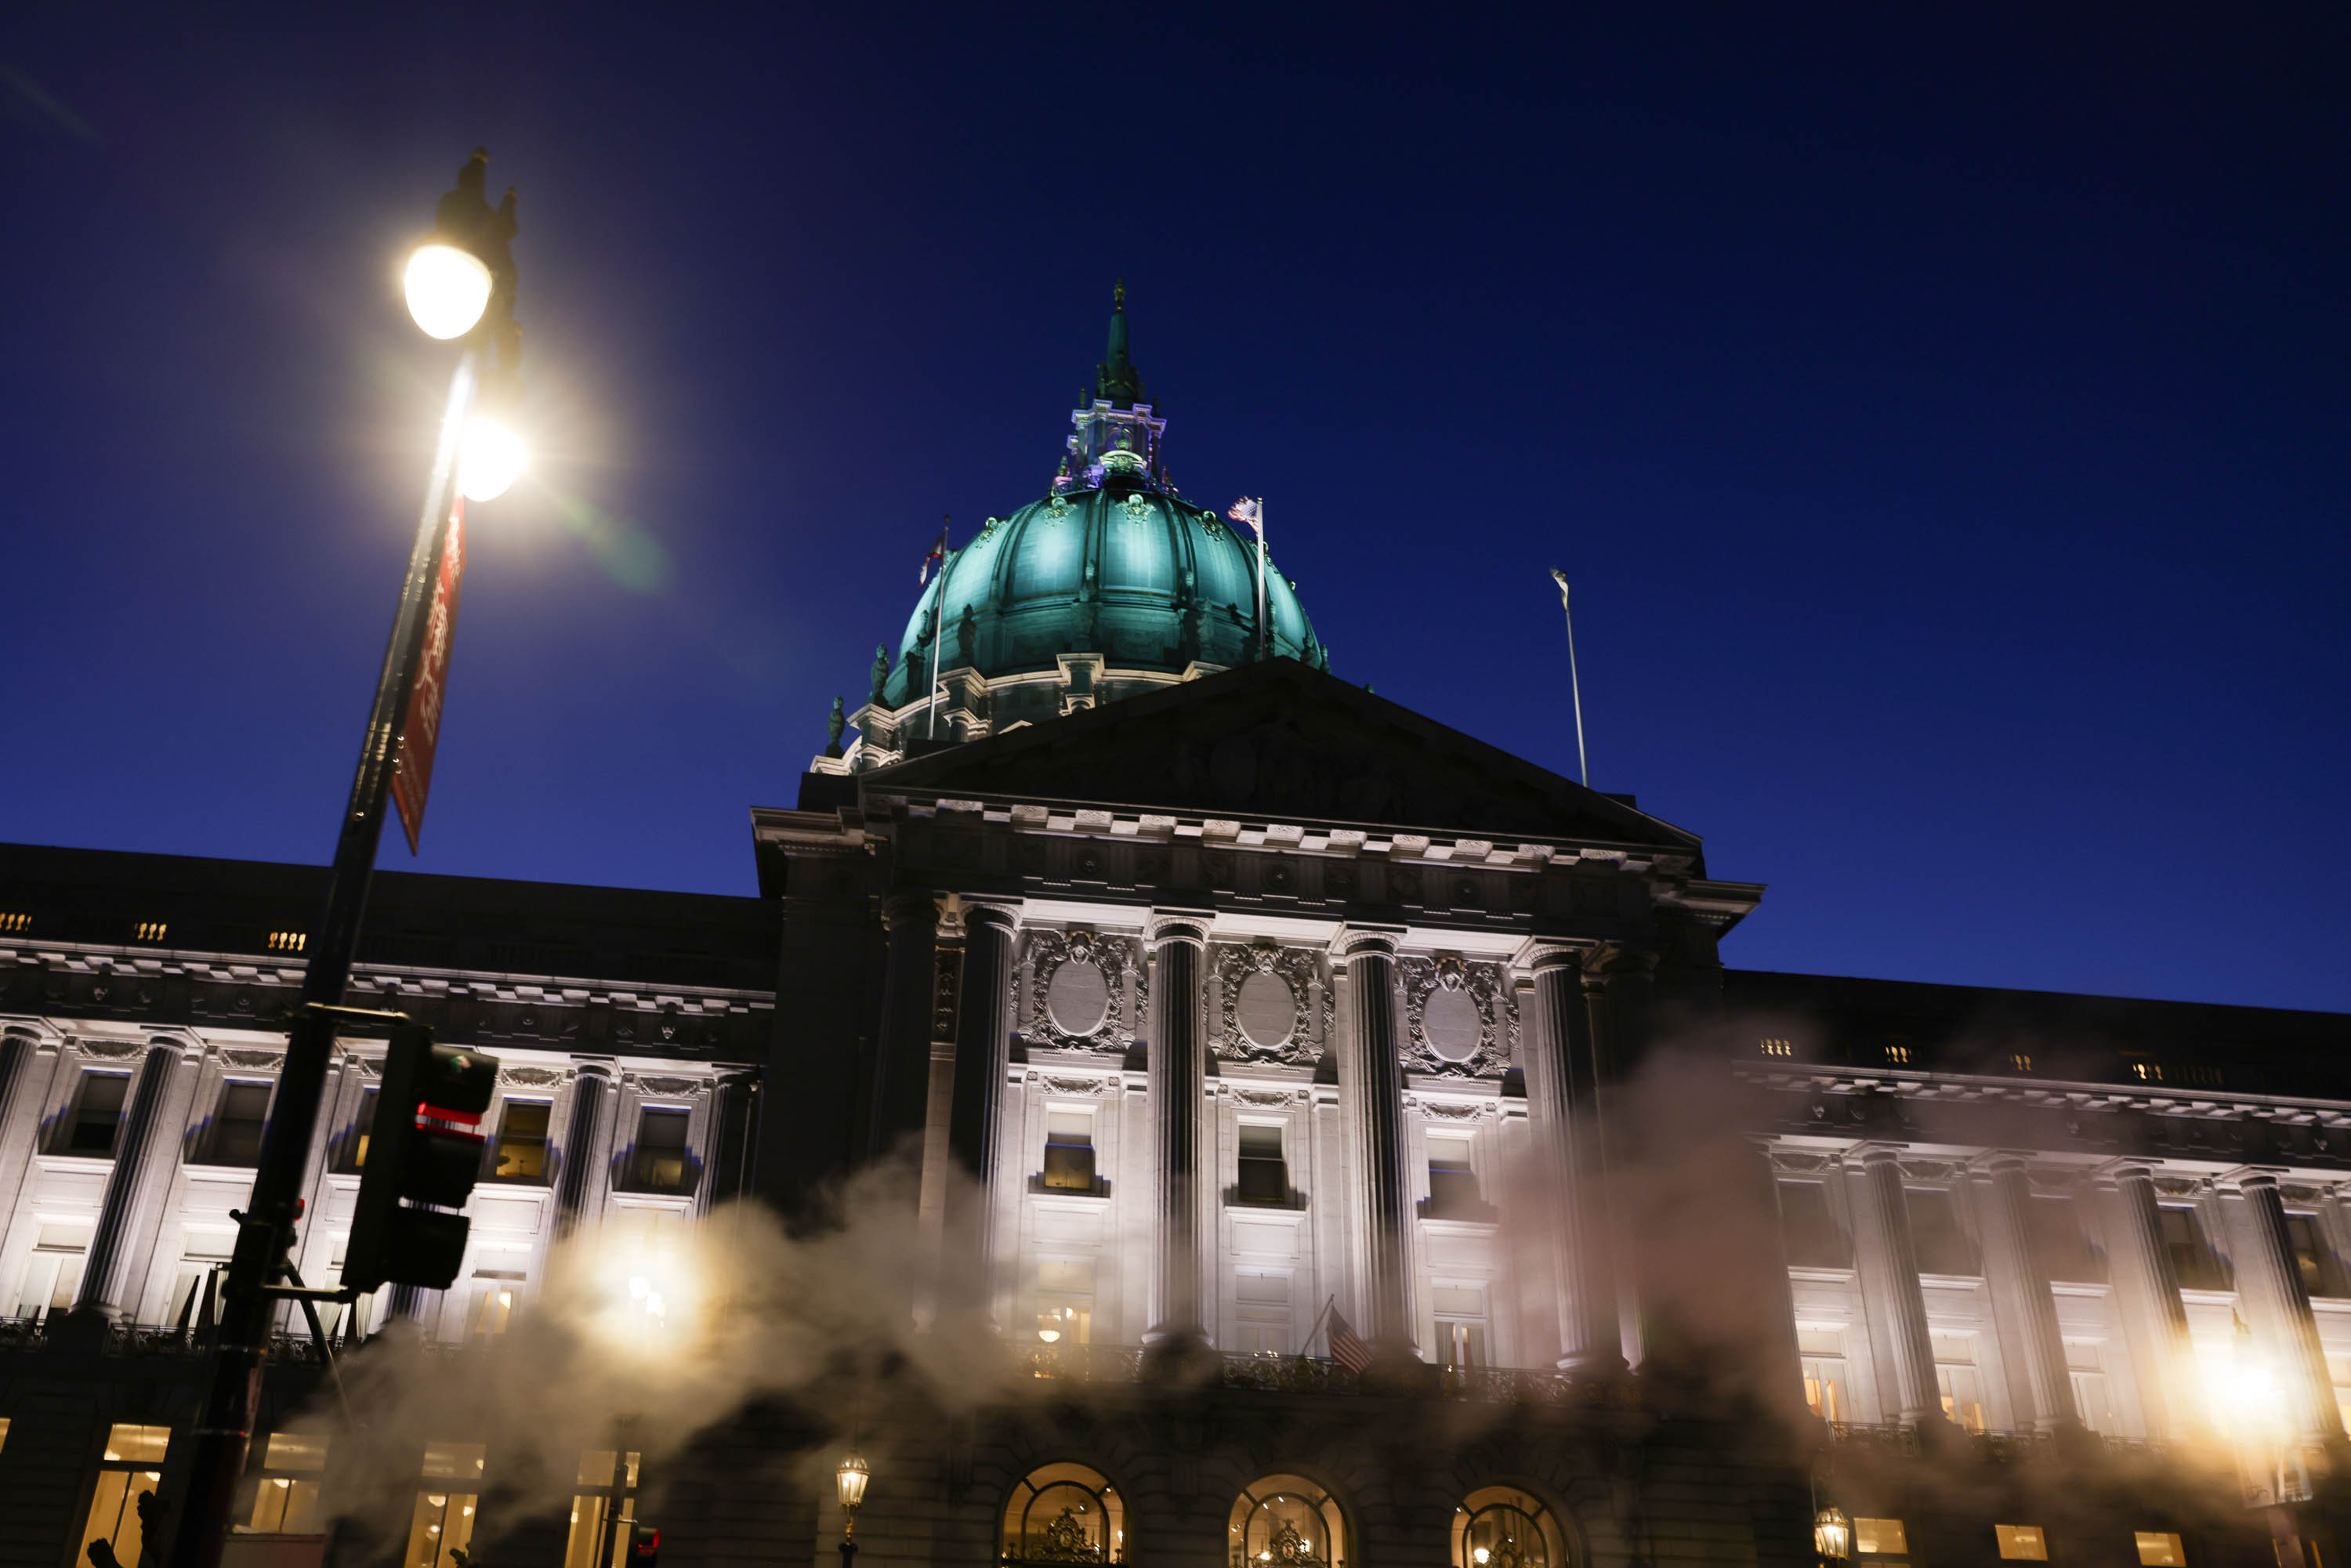 A neoclassical building at dusk with a lit dome and streetlight, obscured partially by steam.